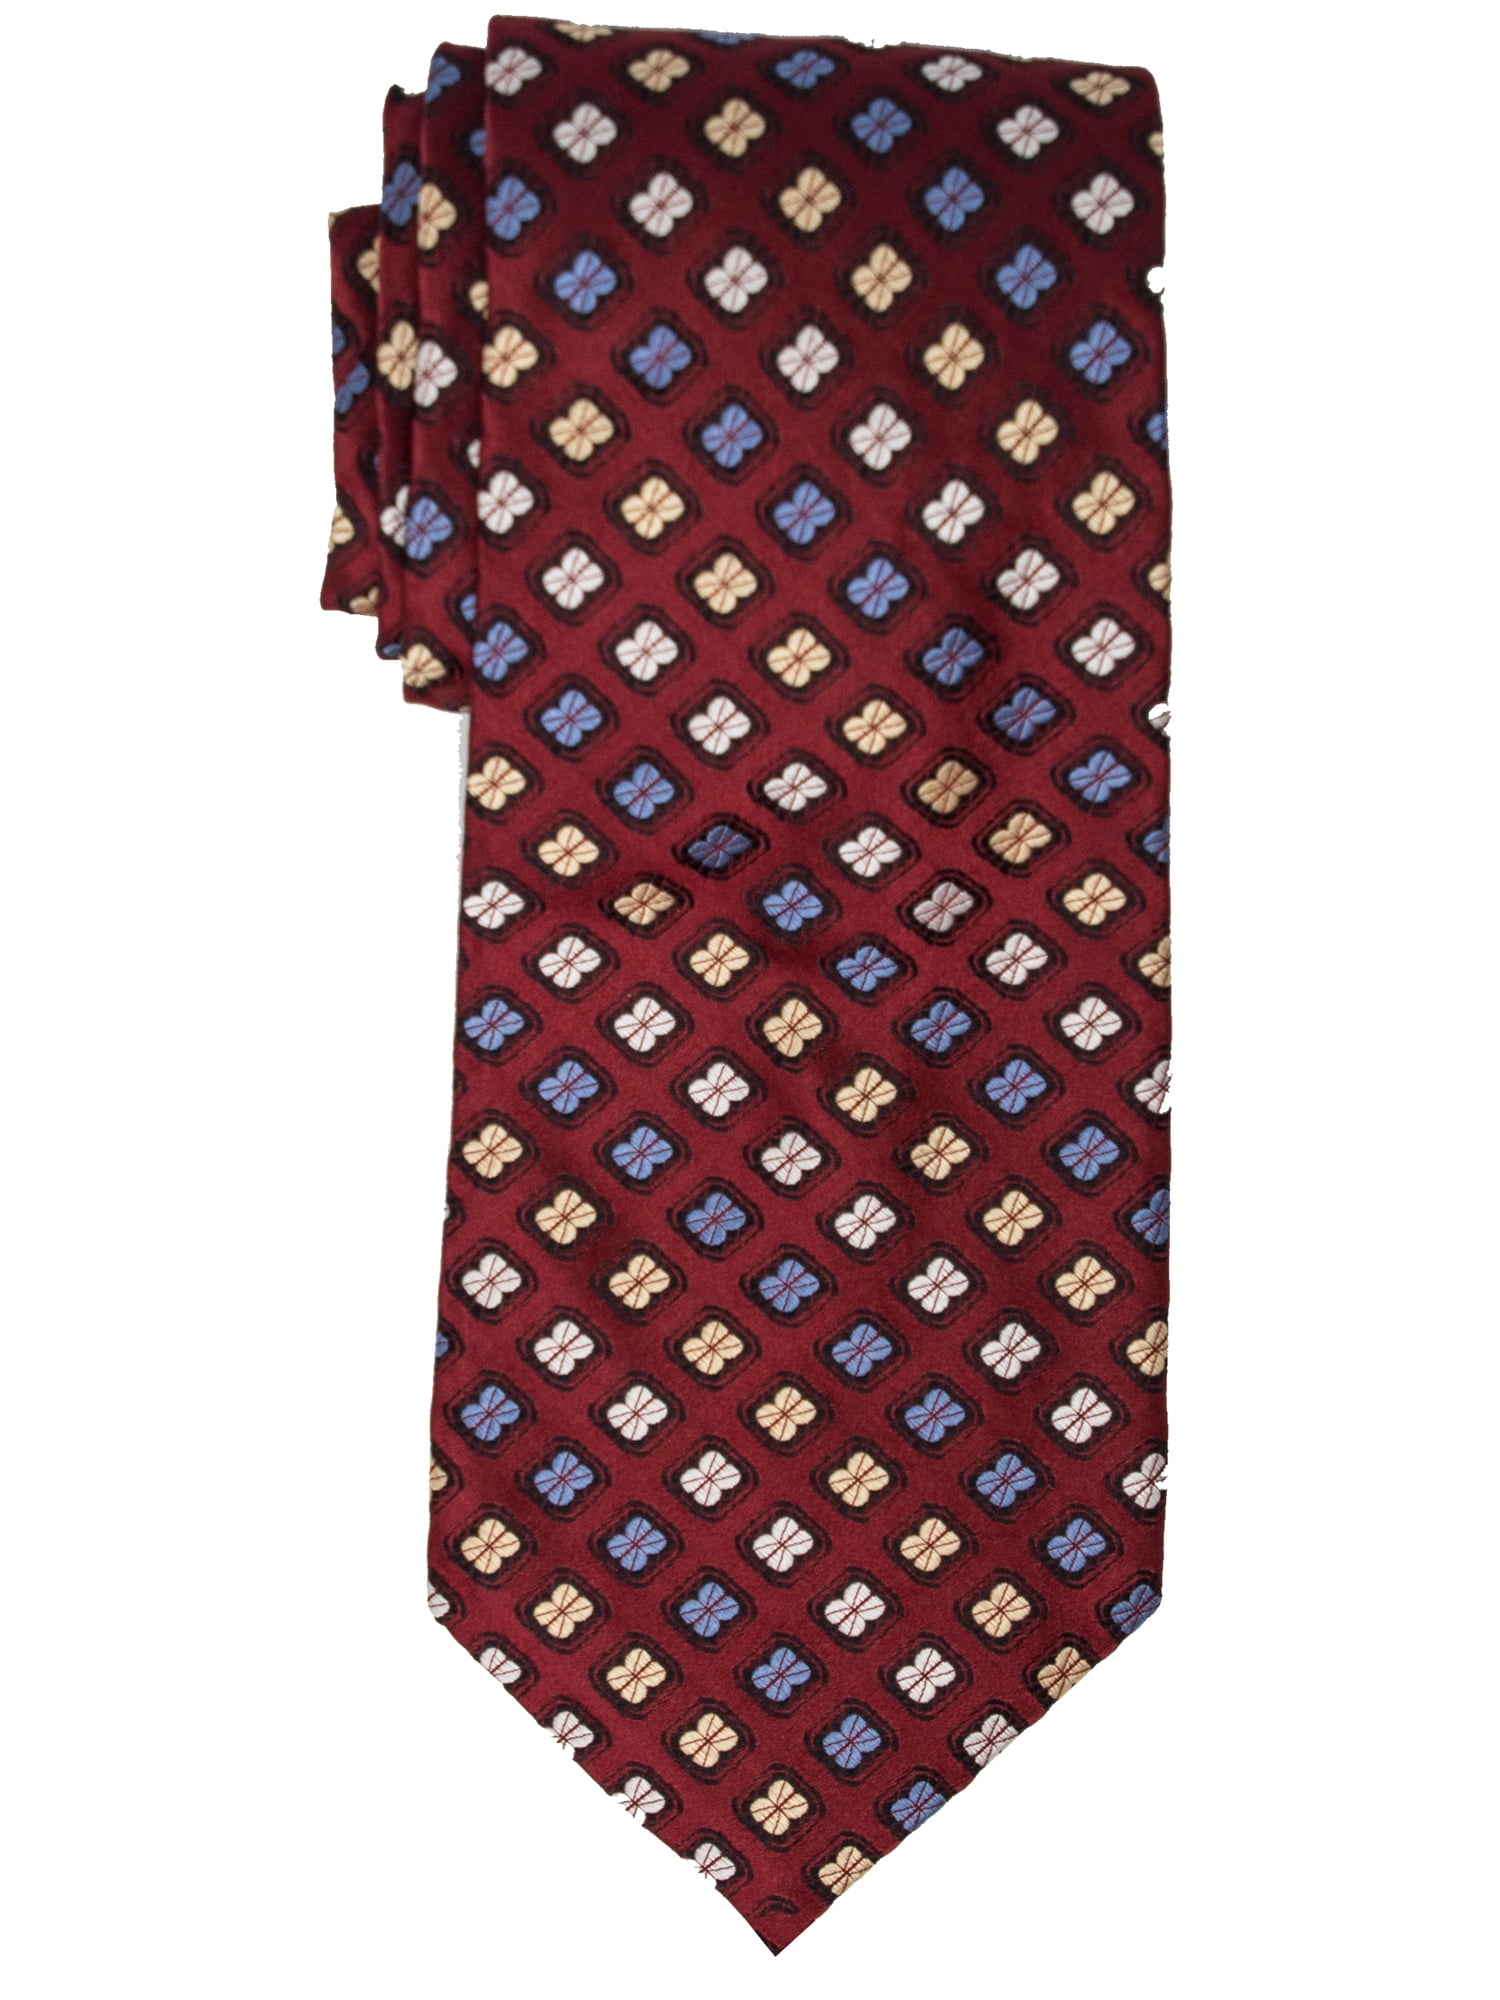 GIFTS FOR MEN Classic Mens Twin Tone Red College Woven Stripe Silk Necktie Tie 